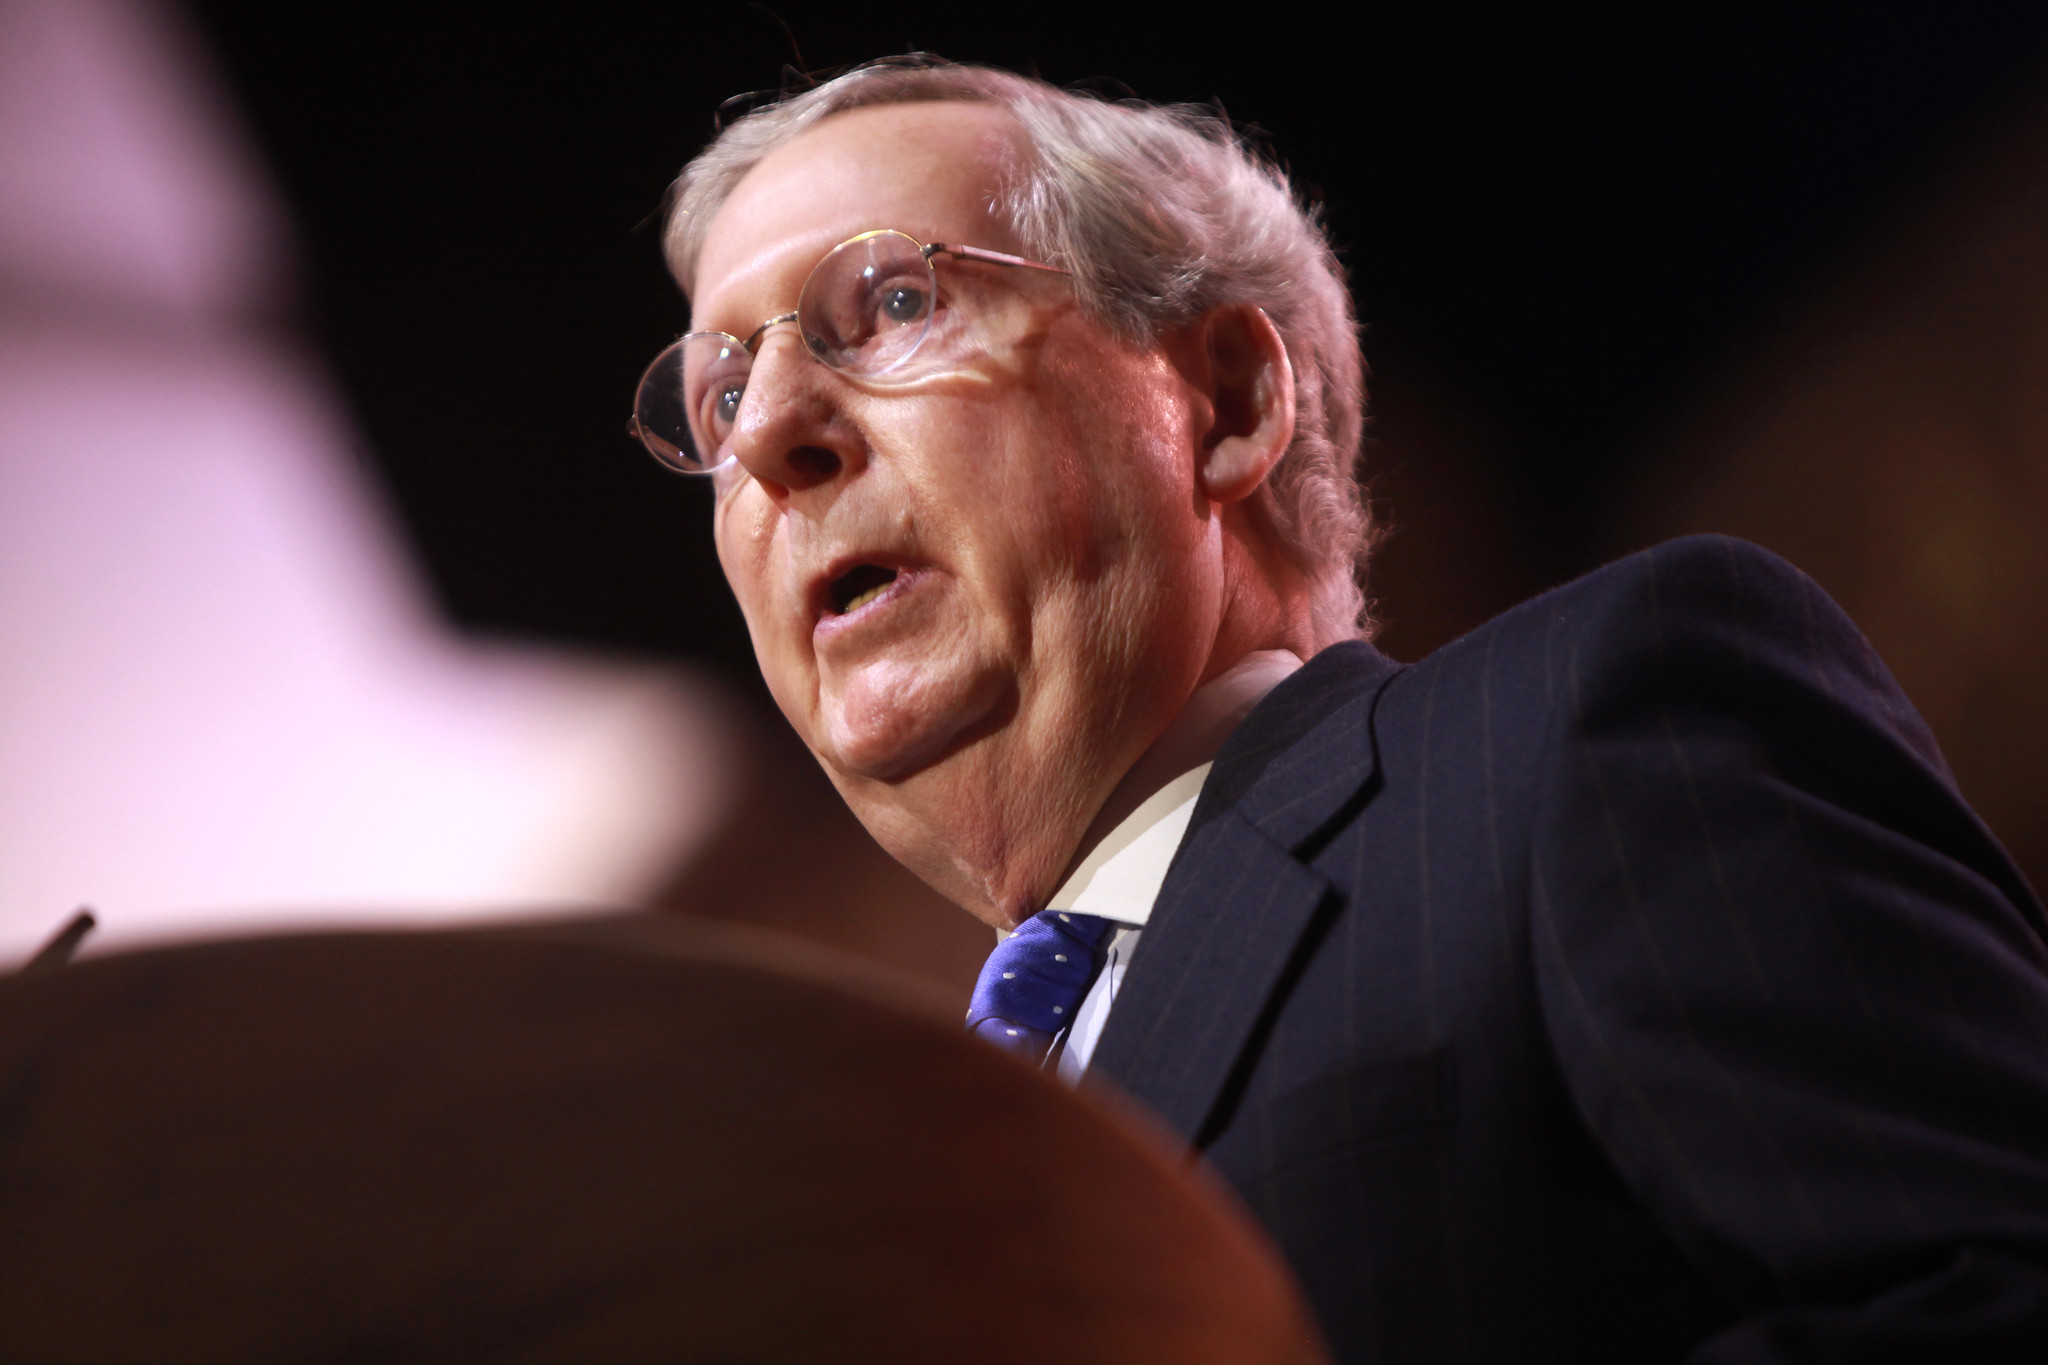 Mitch mcconnell’s entire legacy is ‘misunderstanding politics’